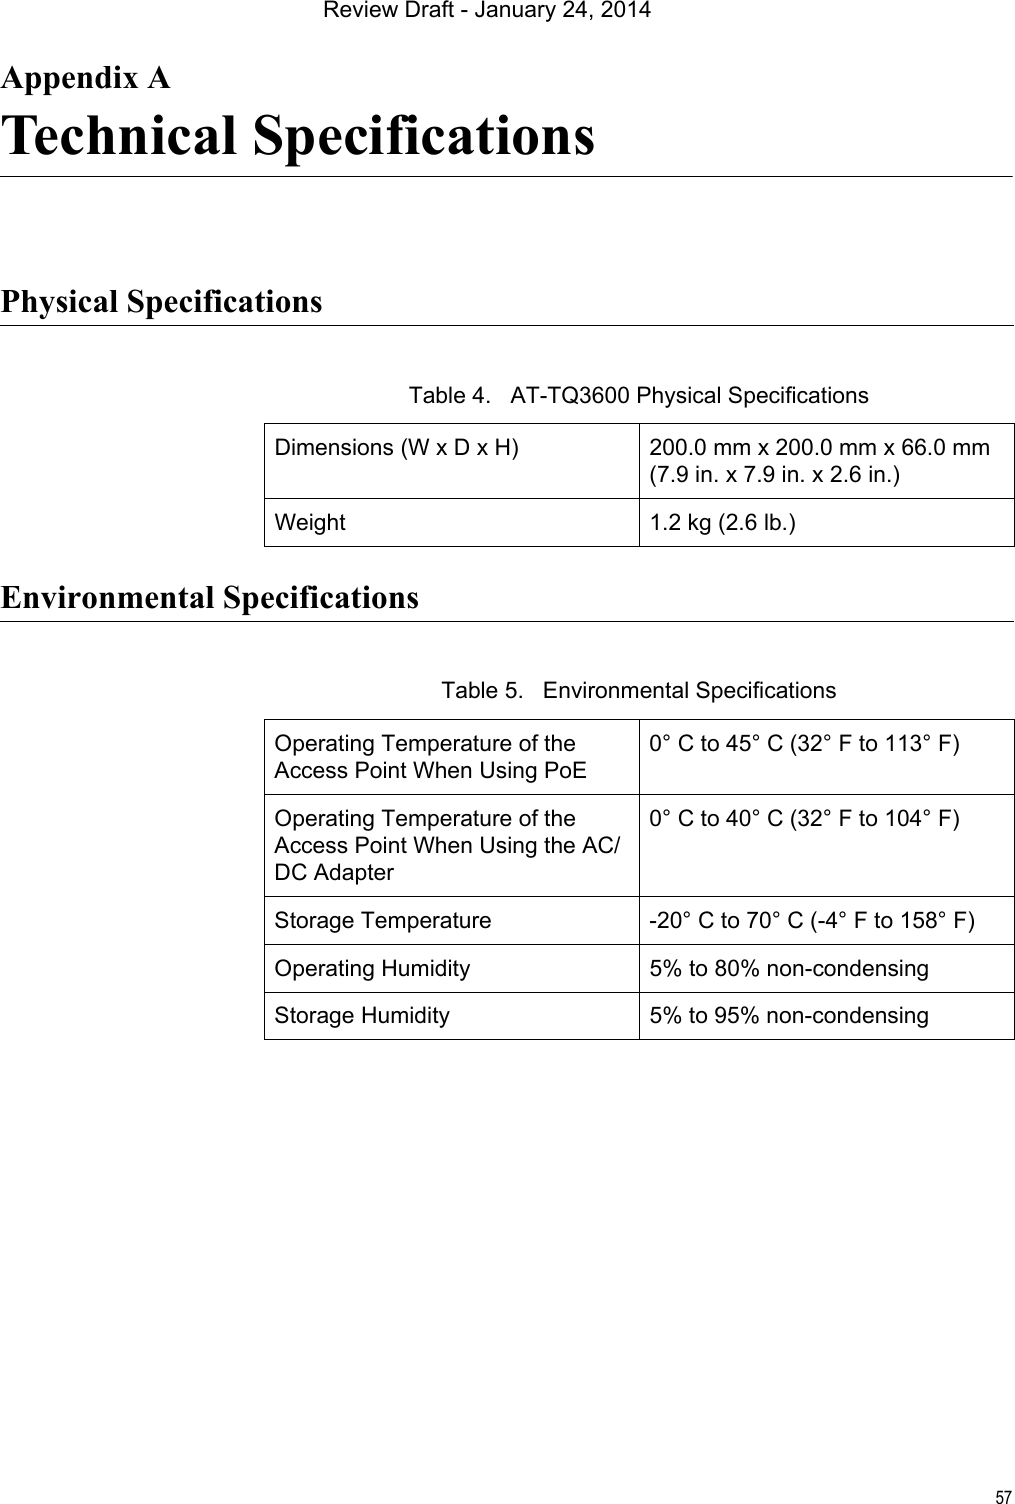 57Appendix ATechnical SpecificationsPhysical SpecificationsEnvironmental SpecificationsTable 4.   AT-TQ3600 Physical SpecificationsDimensions (W x D x H) 200.0 mm x 200.0 mm x 66.0 mm(7.9 in. x 7.9 in. x 2.6 in.)Weight 1.2 kg (2.6 lb.)Table 5.   Environmental SpecificationsOperating Temperature of the Access Point When Using PoE0° C to 45° C (32° F to 113° F)Operating Temperature of the Access Point When Using the AC/DC Adapter0° C to 40° C (32° F to 104° F)Storage Temperature -20° C to 70° C (-4° F to 158° F)Operating Humidity 5% to 80% non-condensingStorage Humidity 5% to 95% non-condensingReview Draft - January 24, 2014